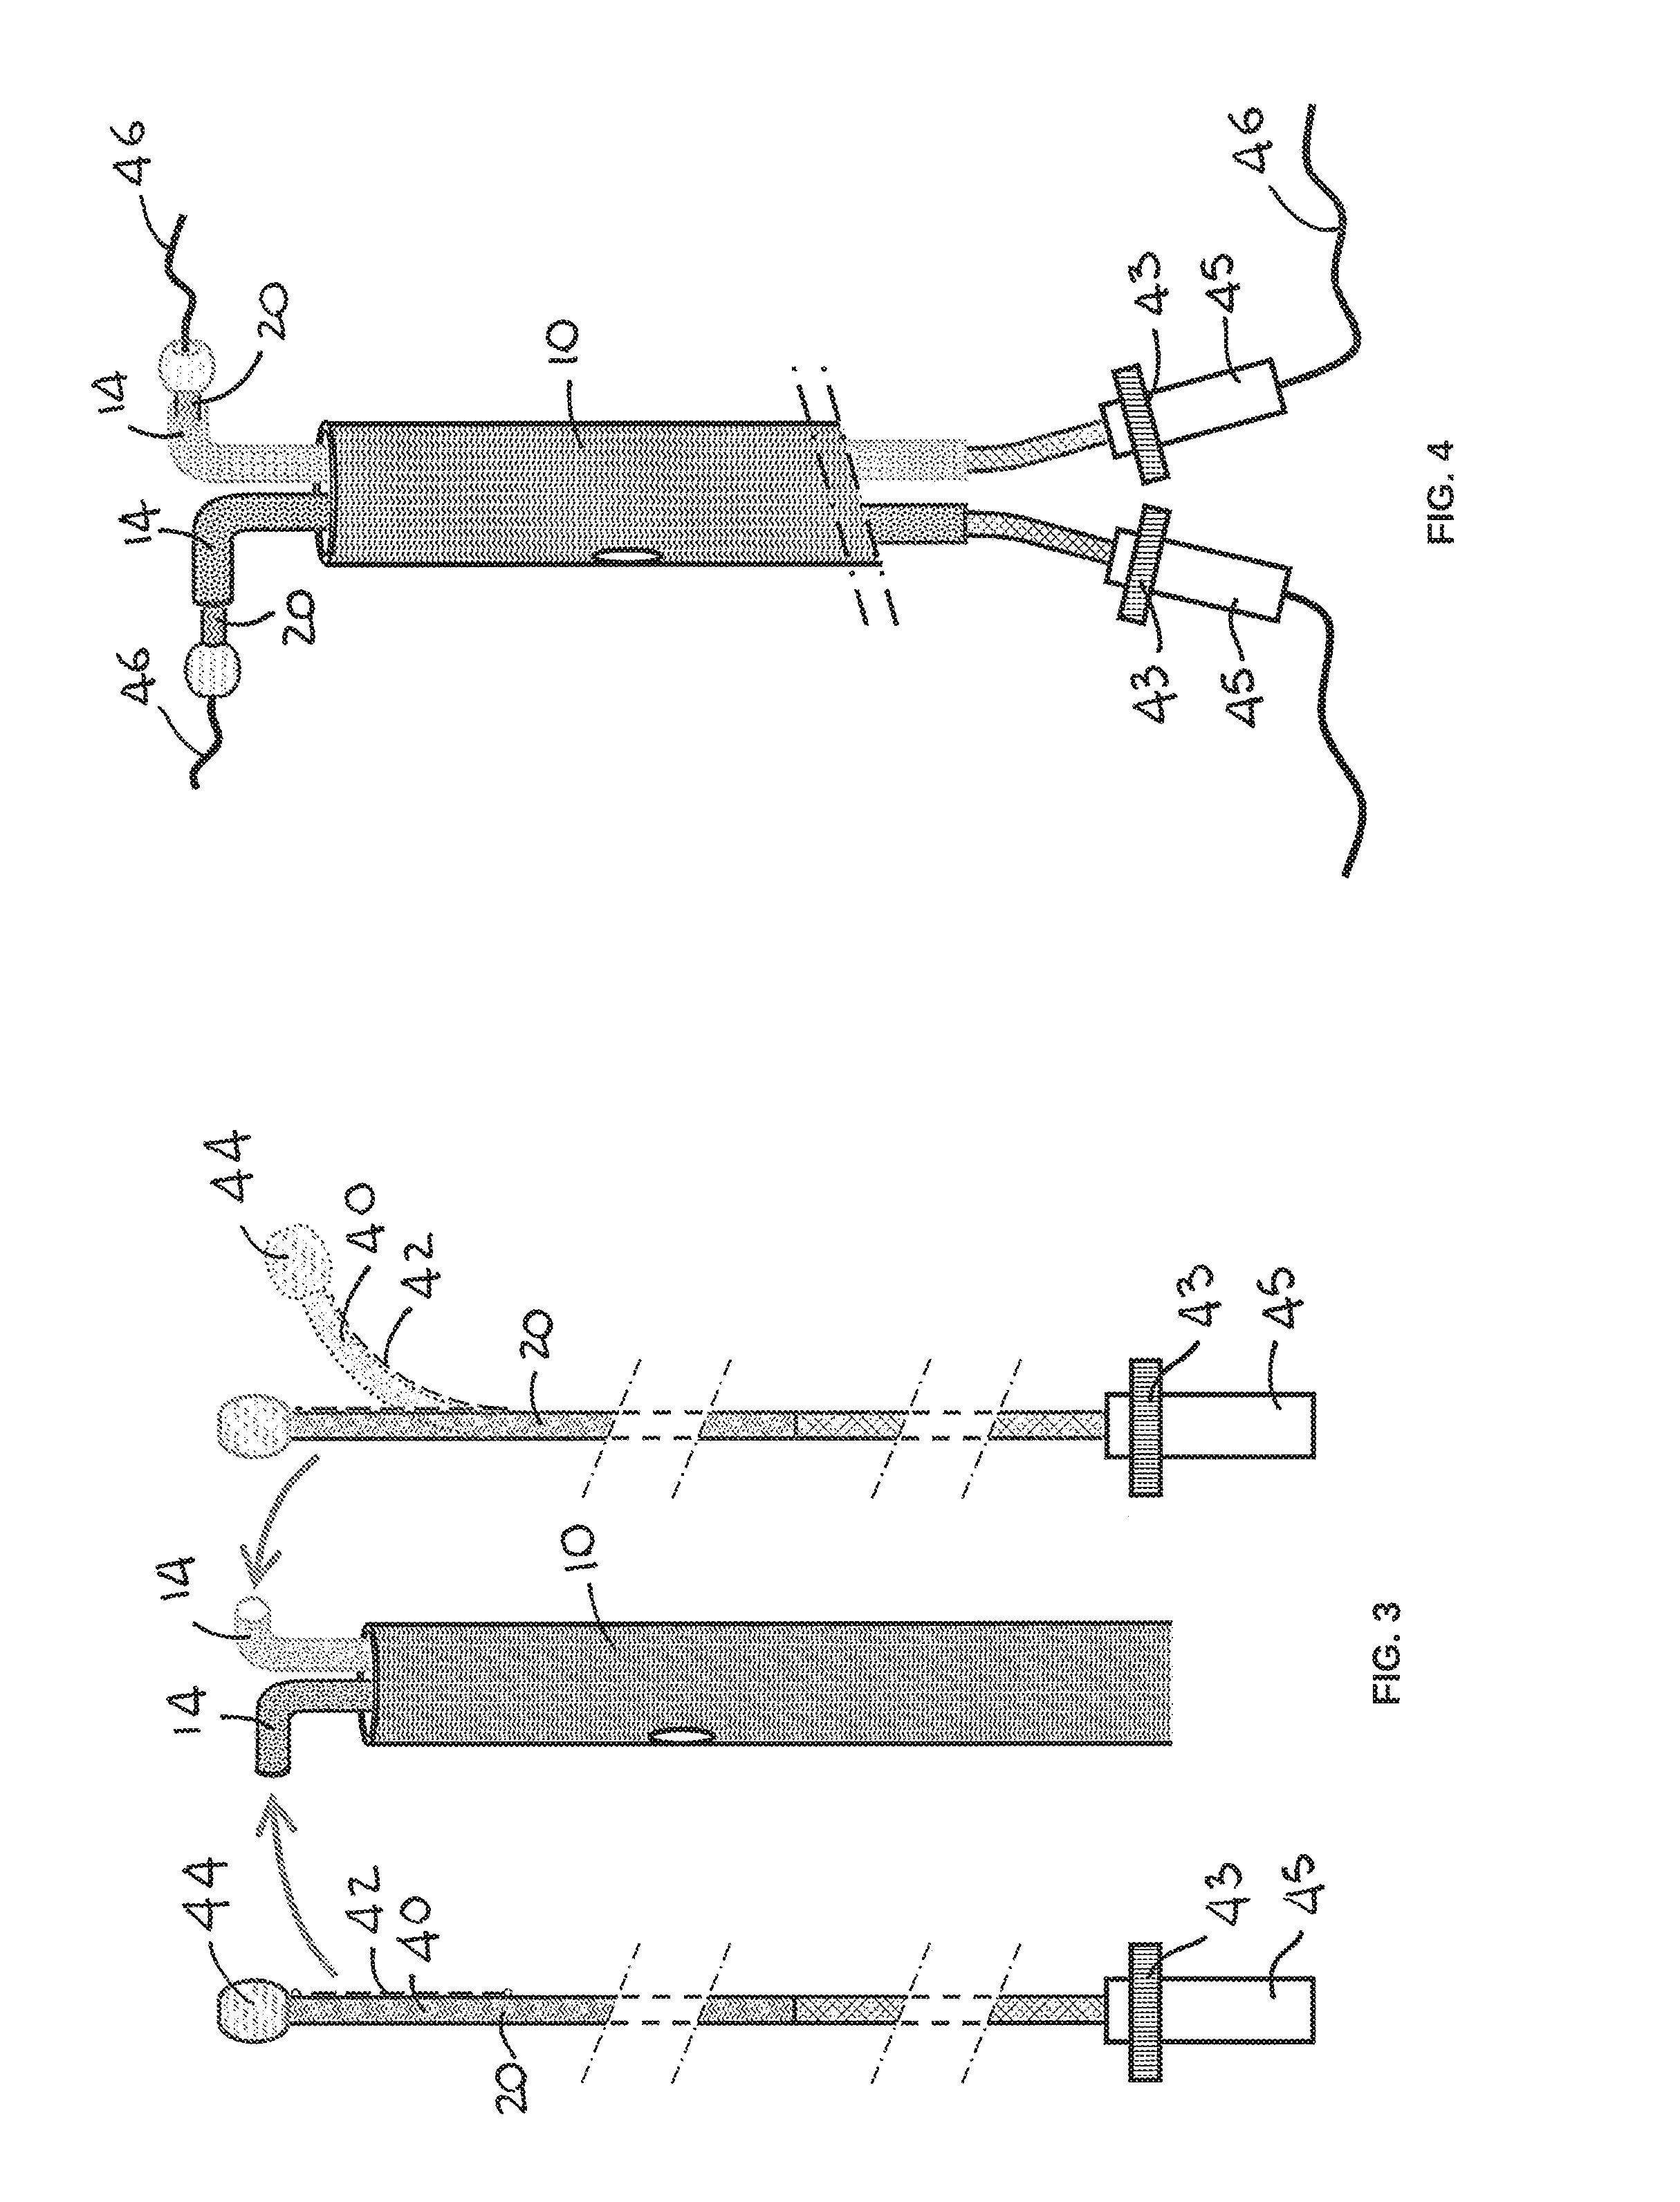 Device for the Deployment of a System of Guide Wires Within a Cardiac Chamber for Implanting a Prosthetic Heart Valve